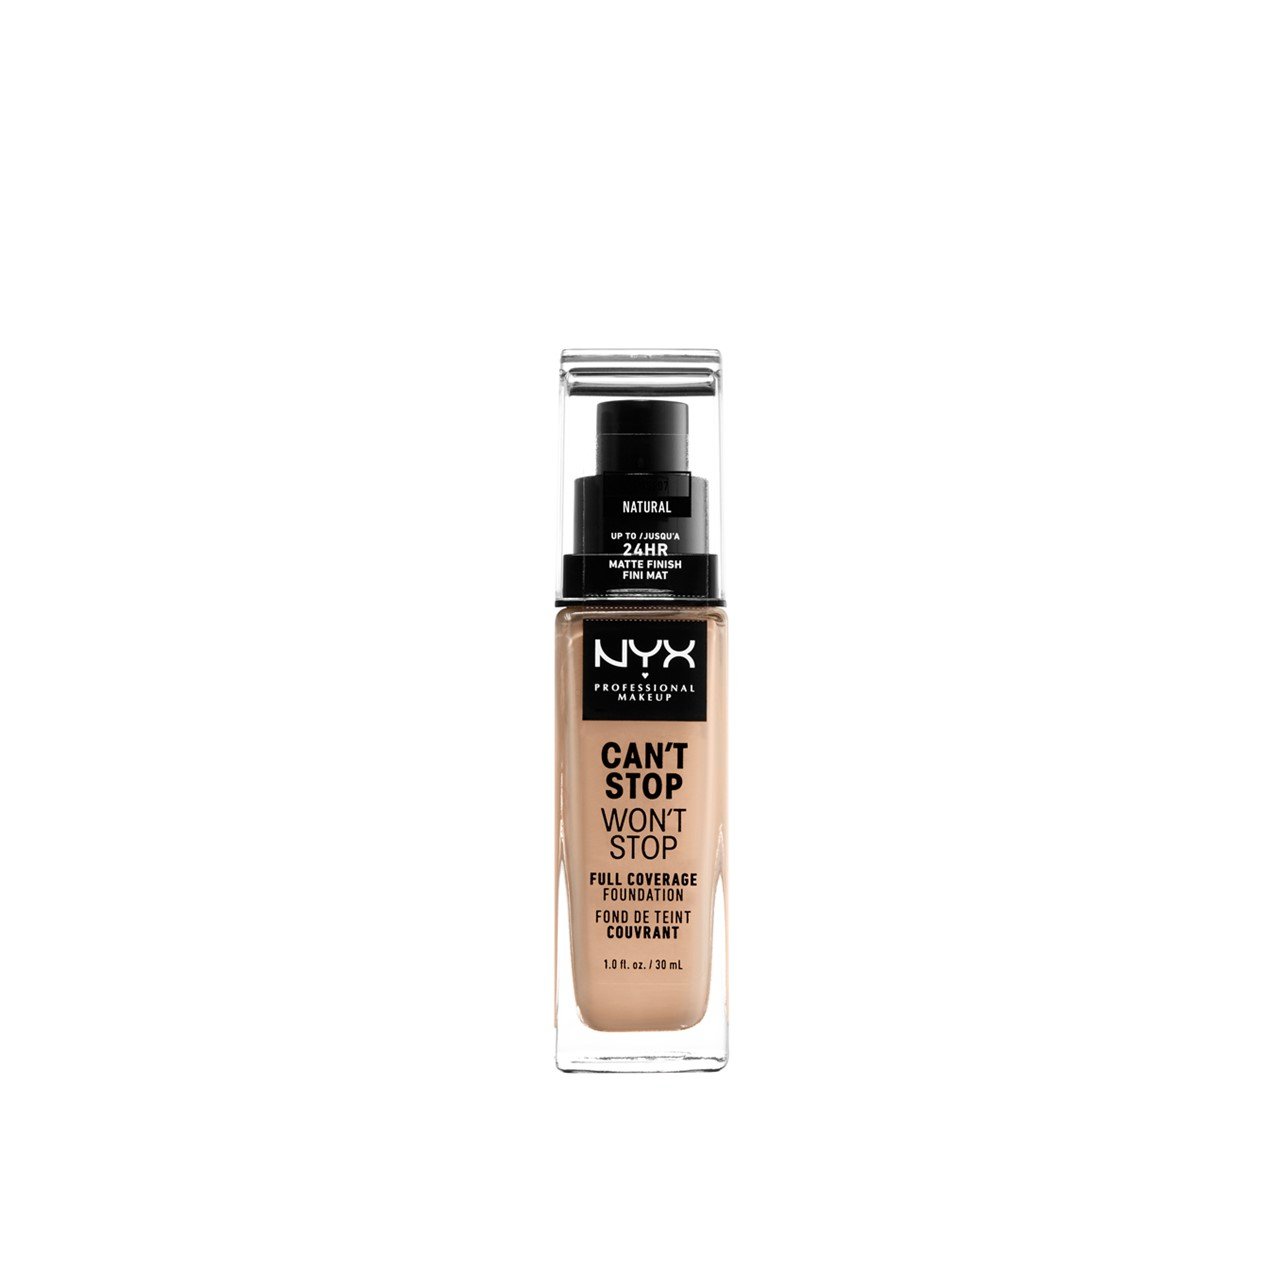 NYX Pro Makeup Can't Stop Won't Stop Foundation Natural 30ml (1.01fl oz)